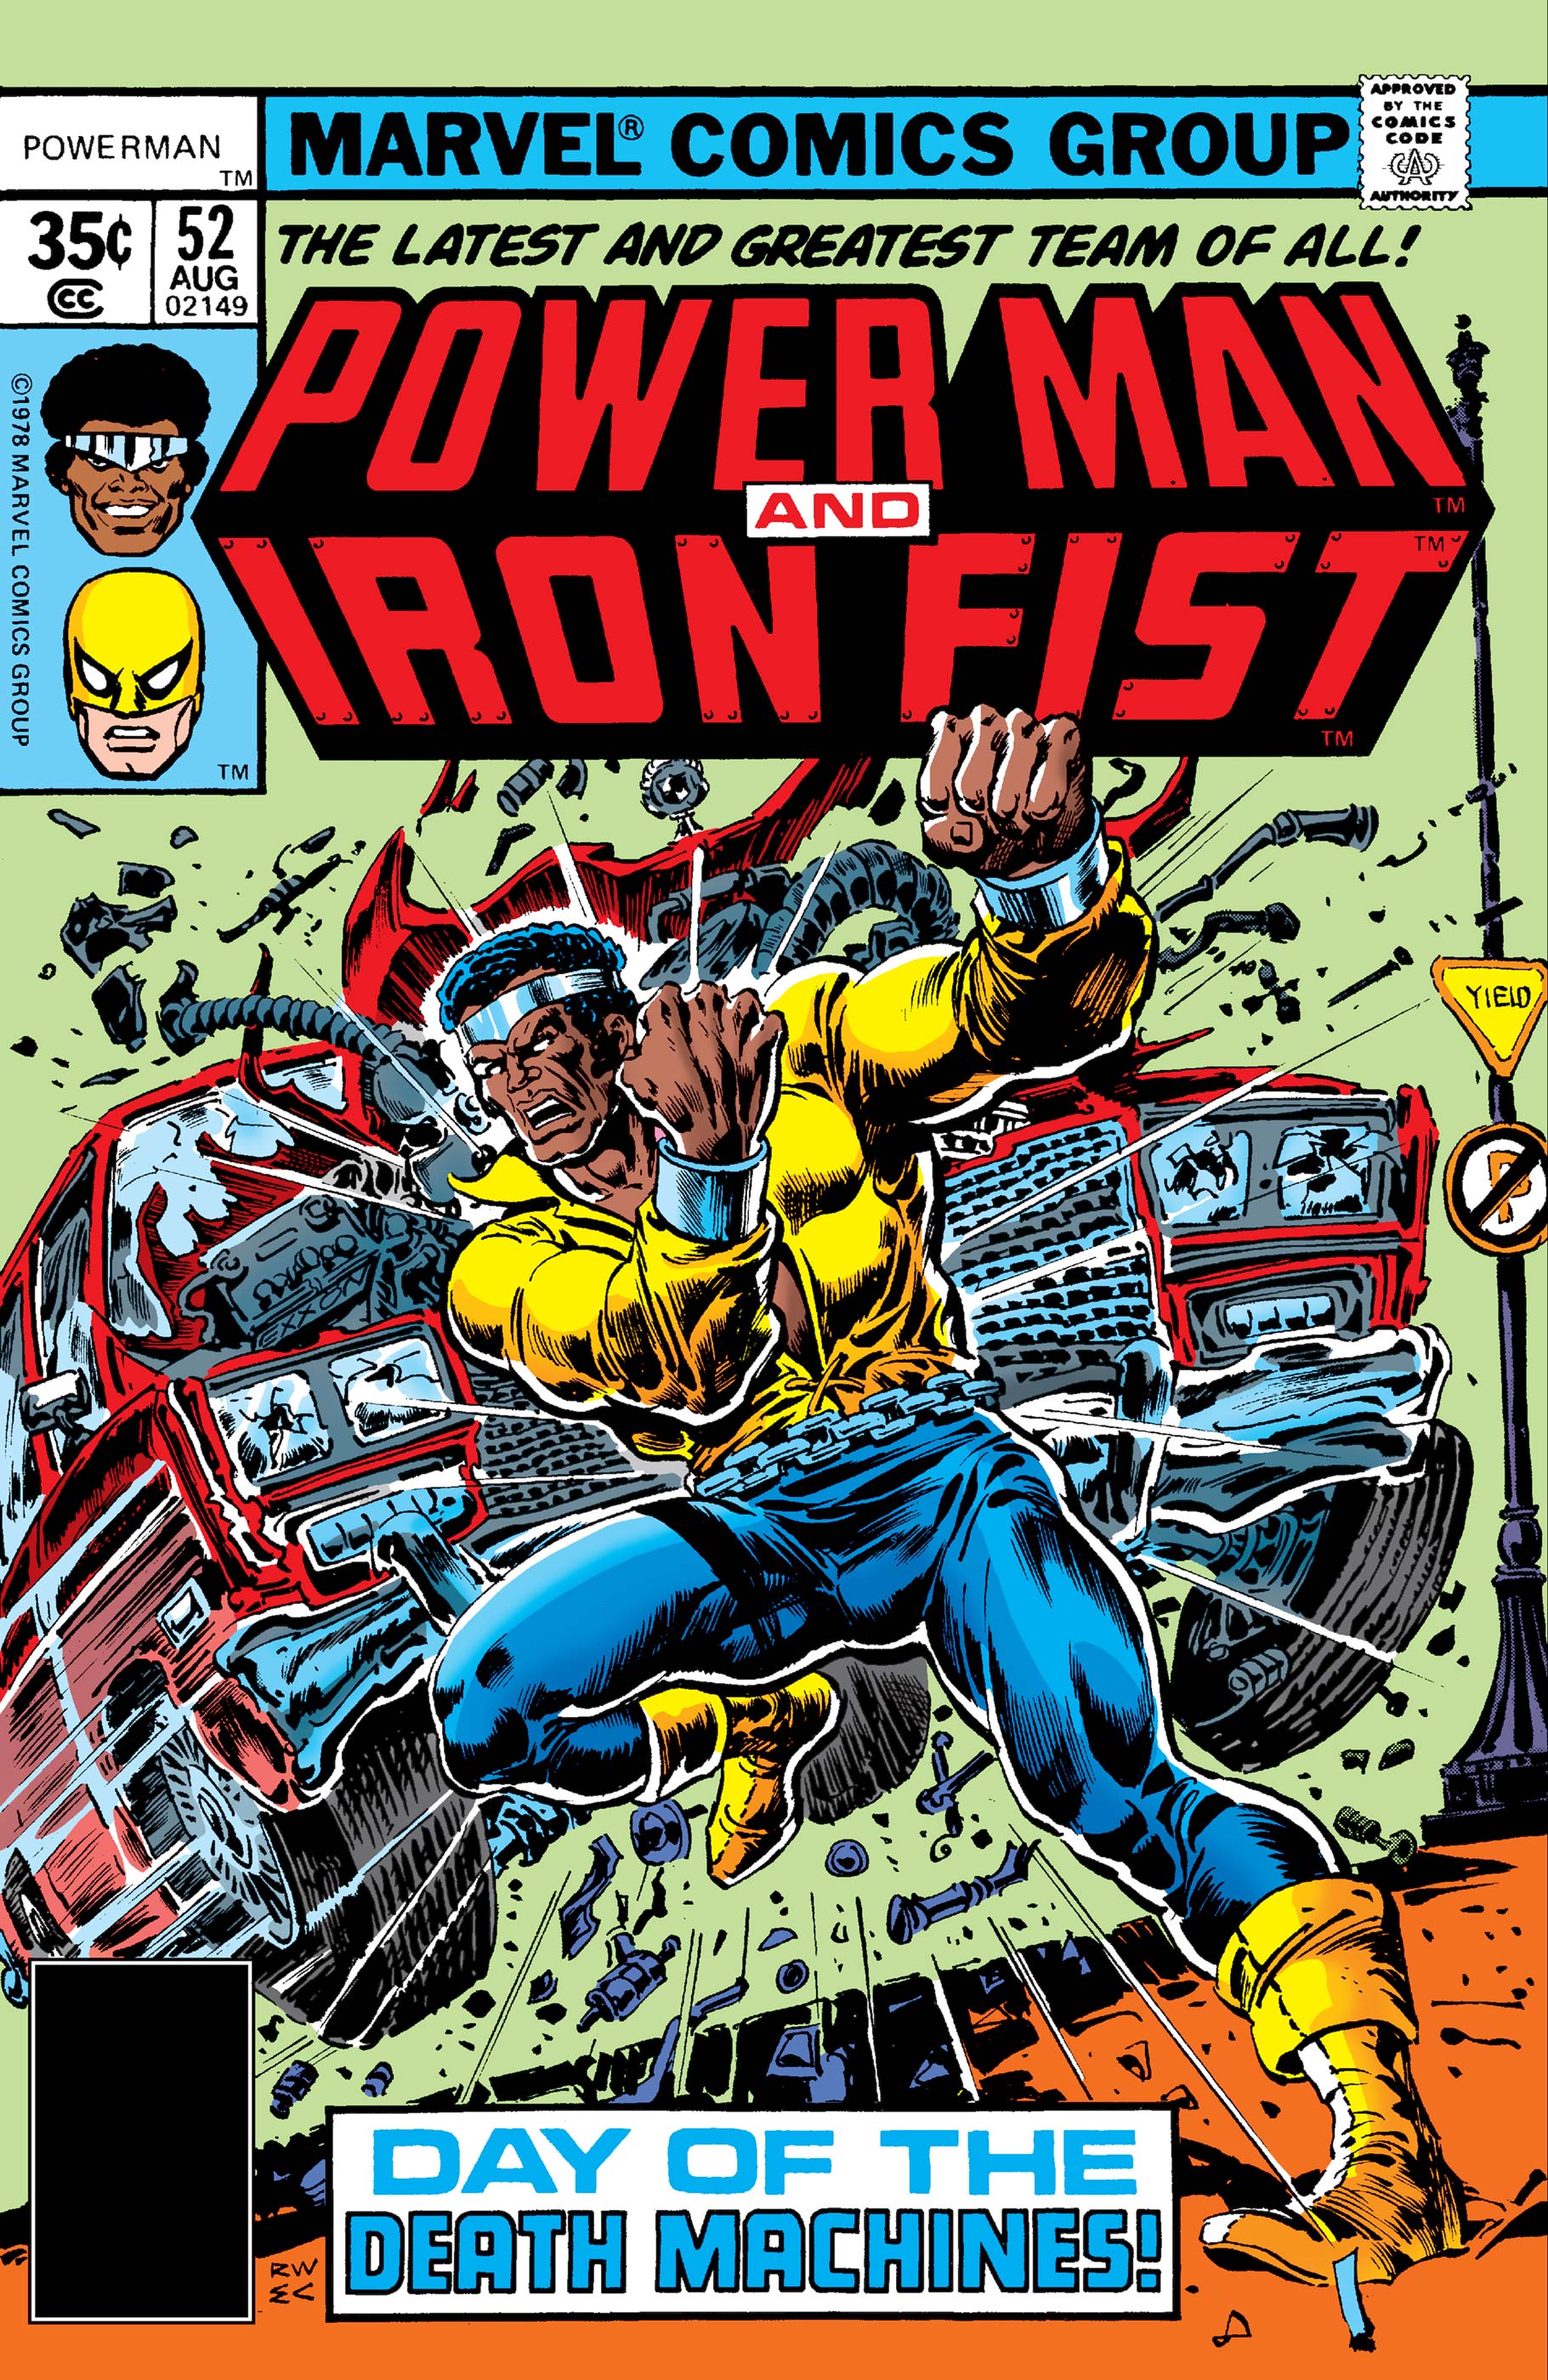 Power Man and Iron Fist (1978) #52